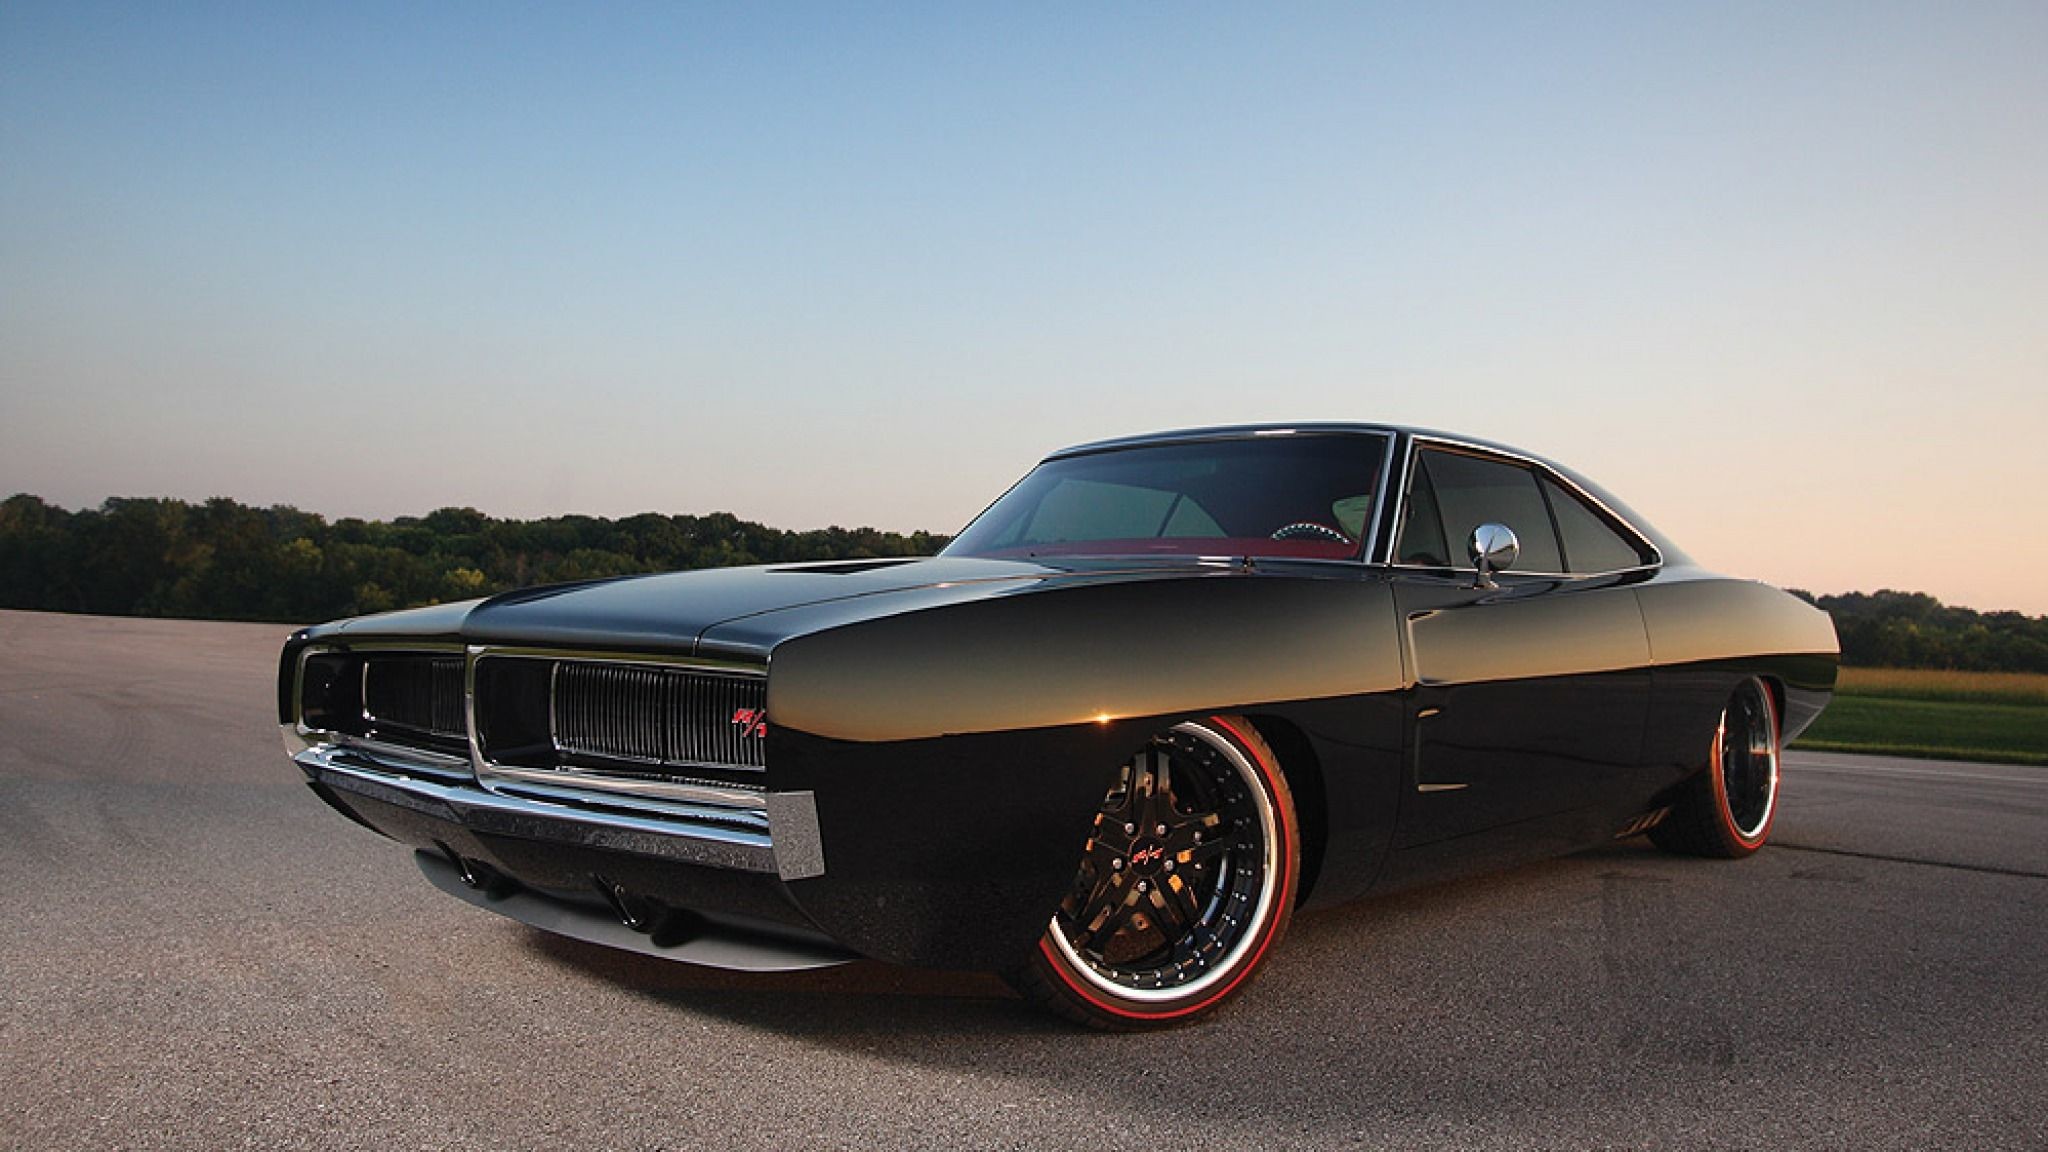 2048x1152 Dodge Charger Wallpapers | HD Wallpapers | Pinterest | Dodge charger, Dodge  and Hd wallpaper